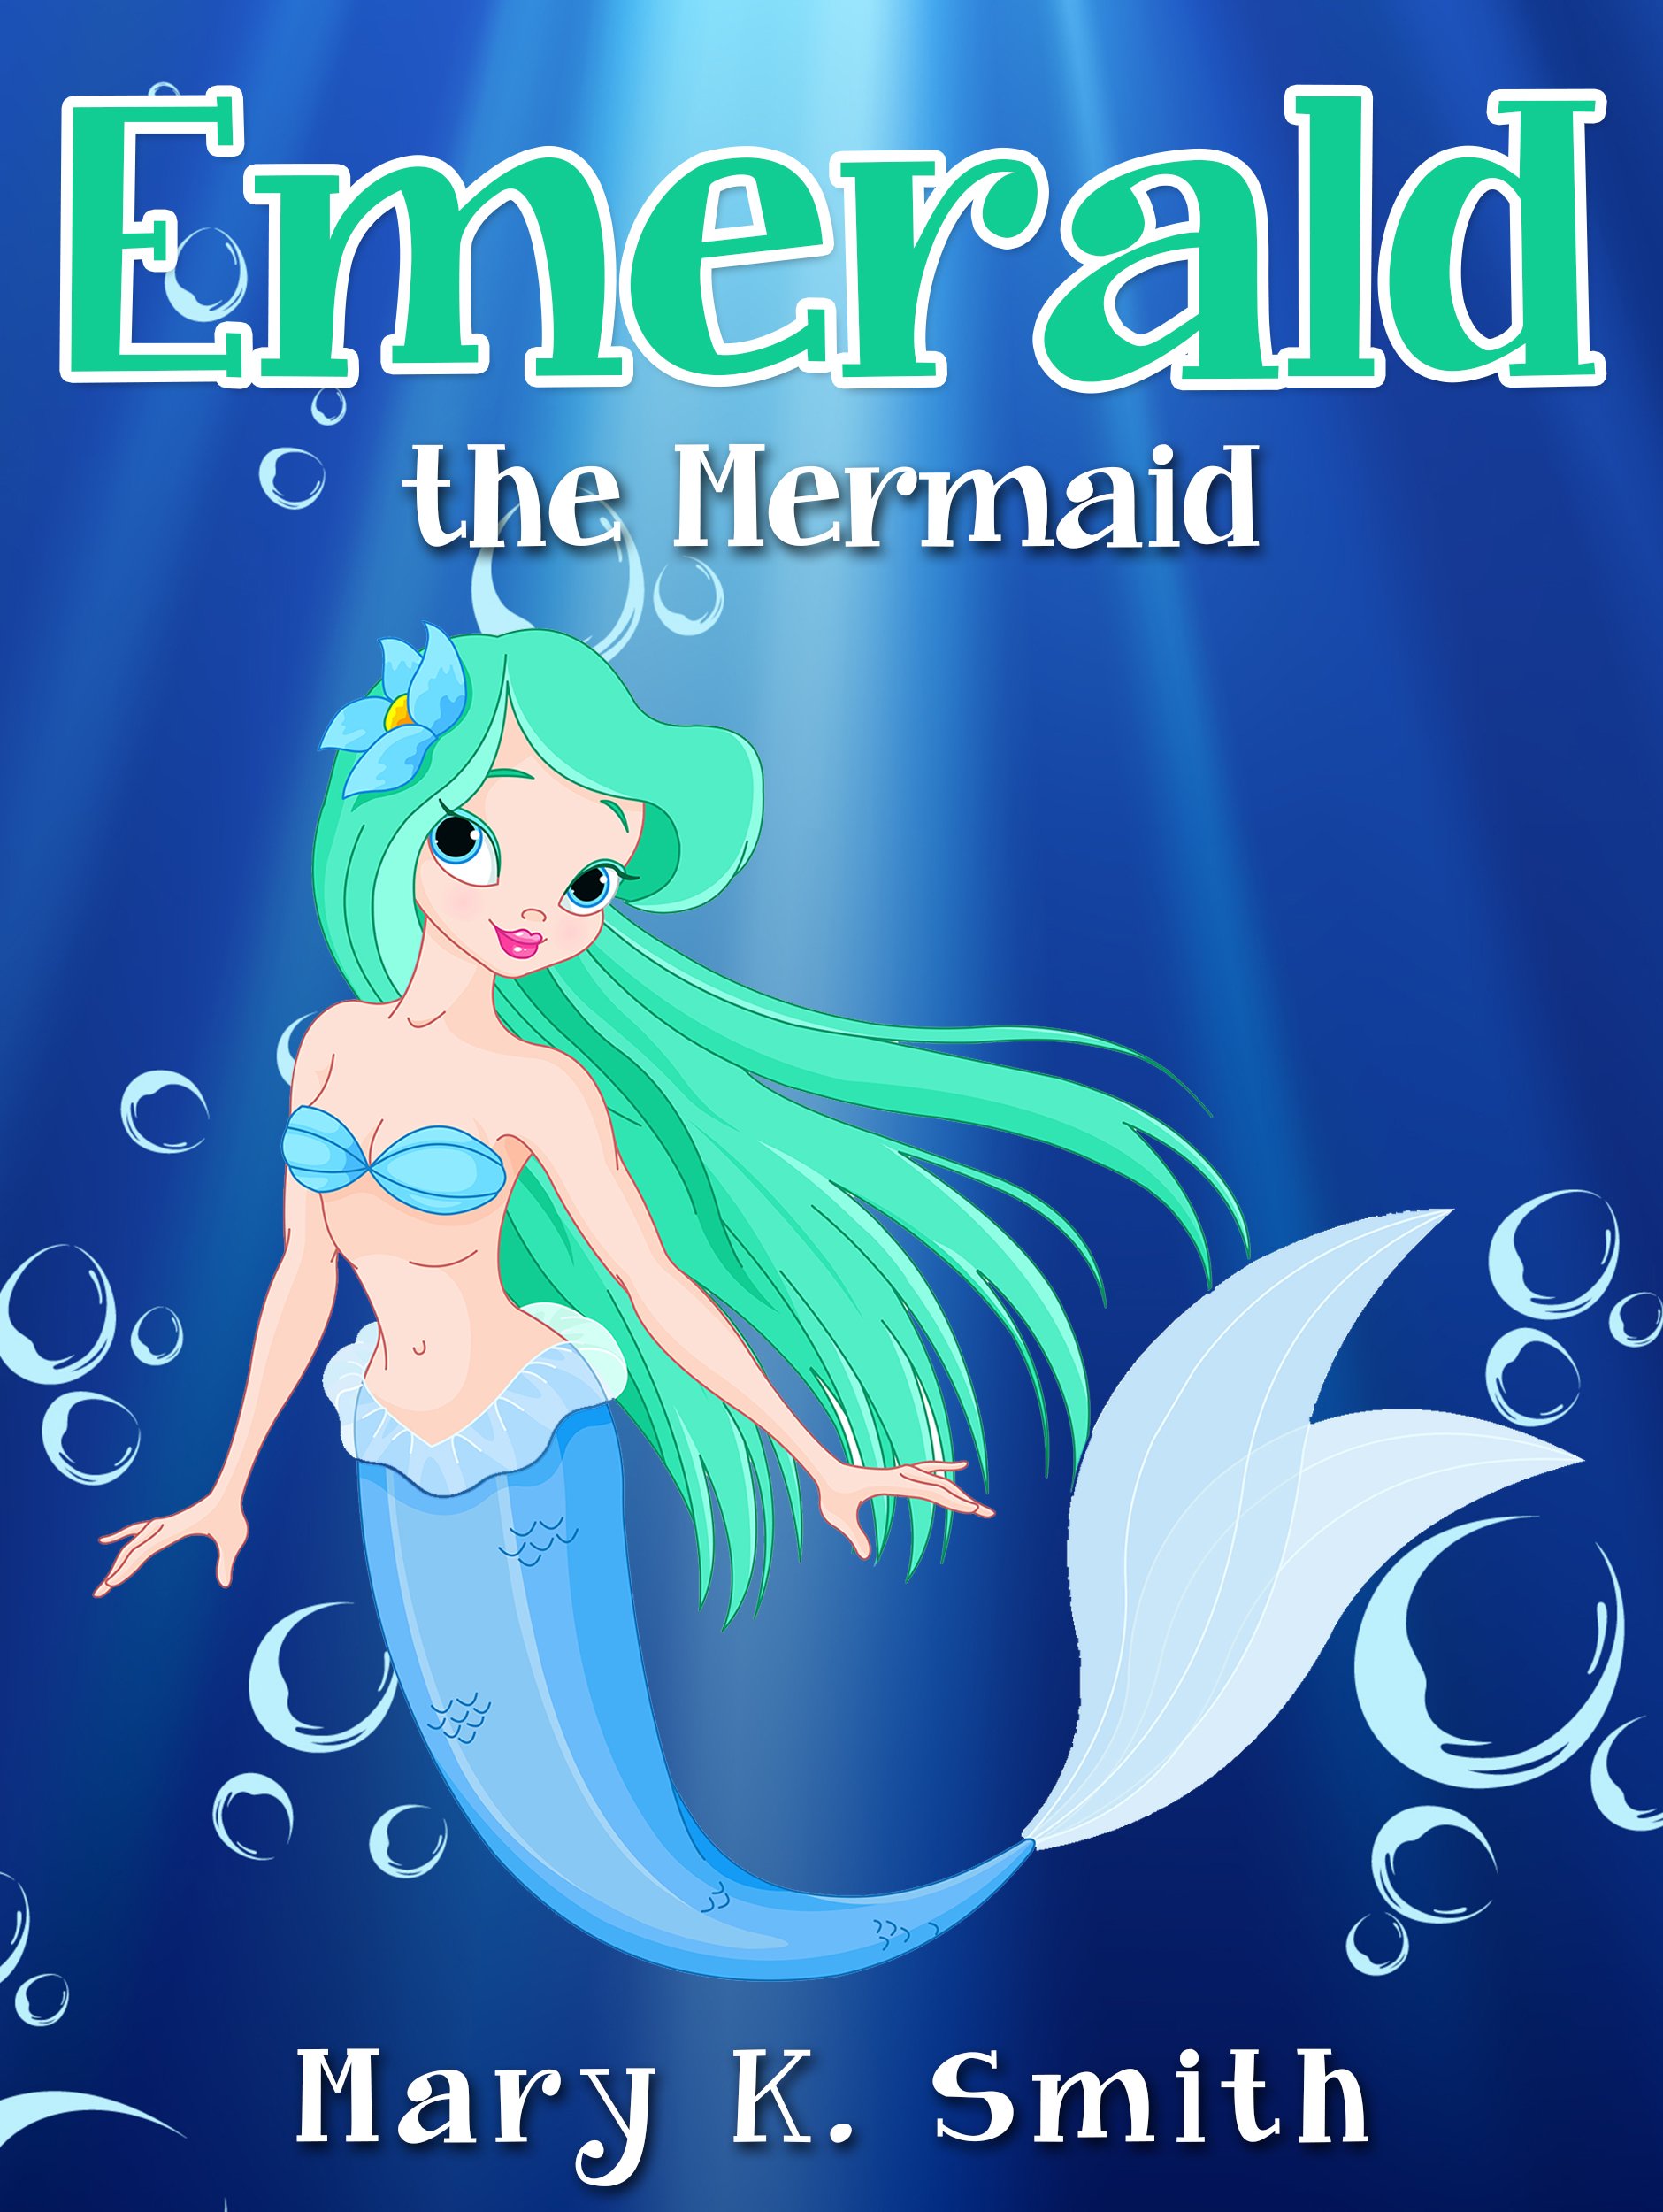 Emerald the Mermaid: Cute Fairy Tale Bedtime Story for Kids (Sunshine Reading Book 4)